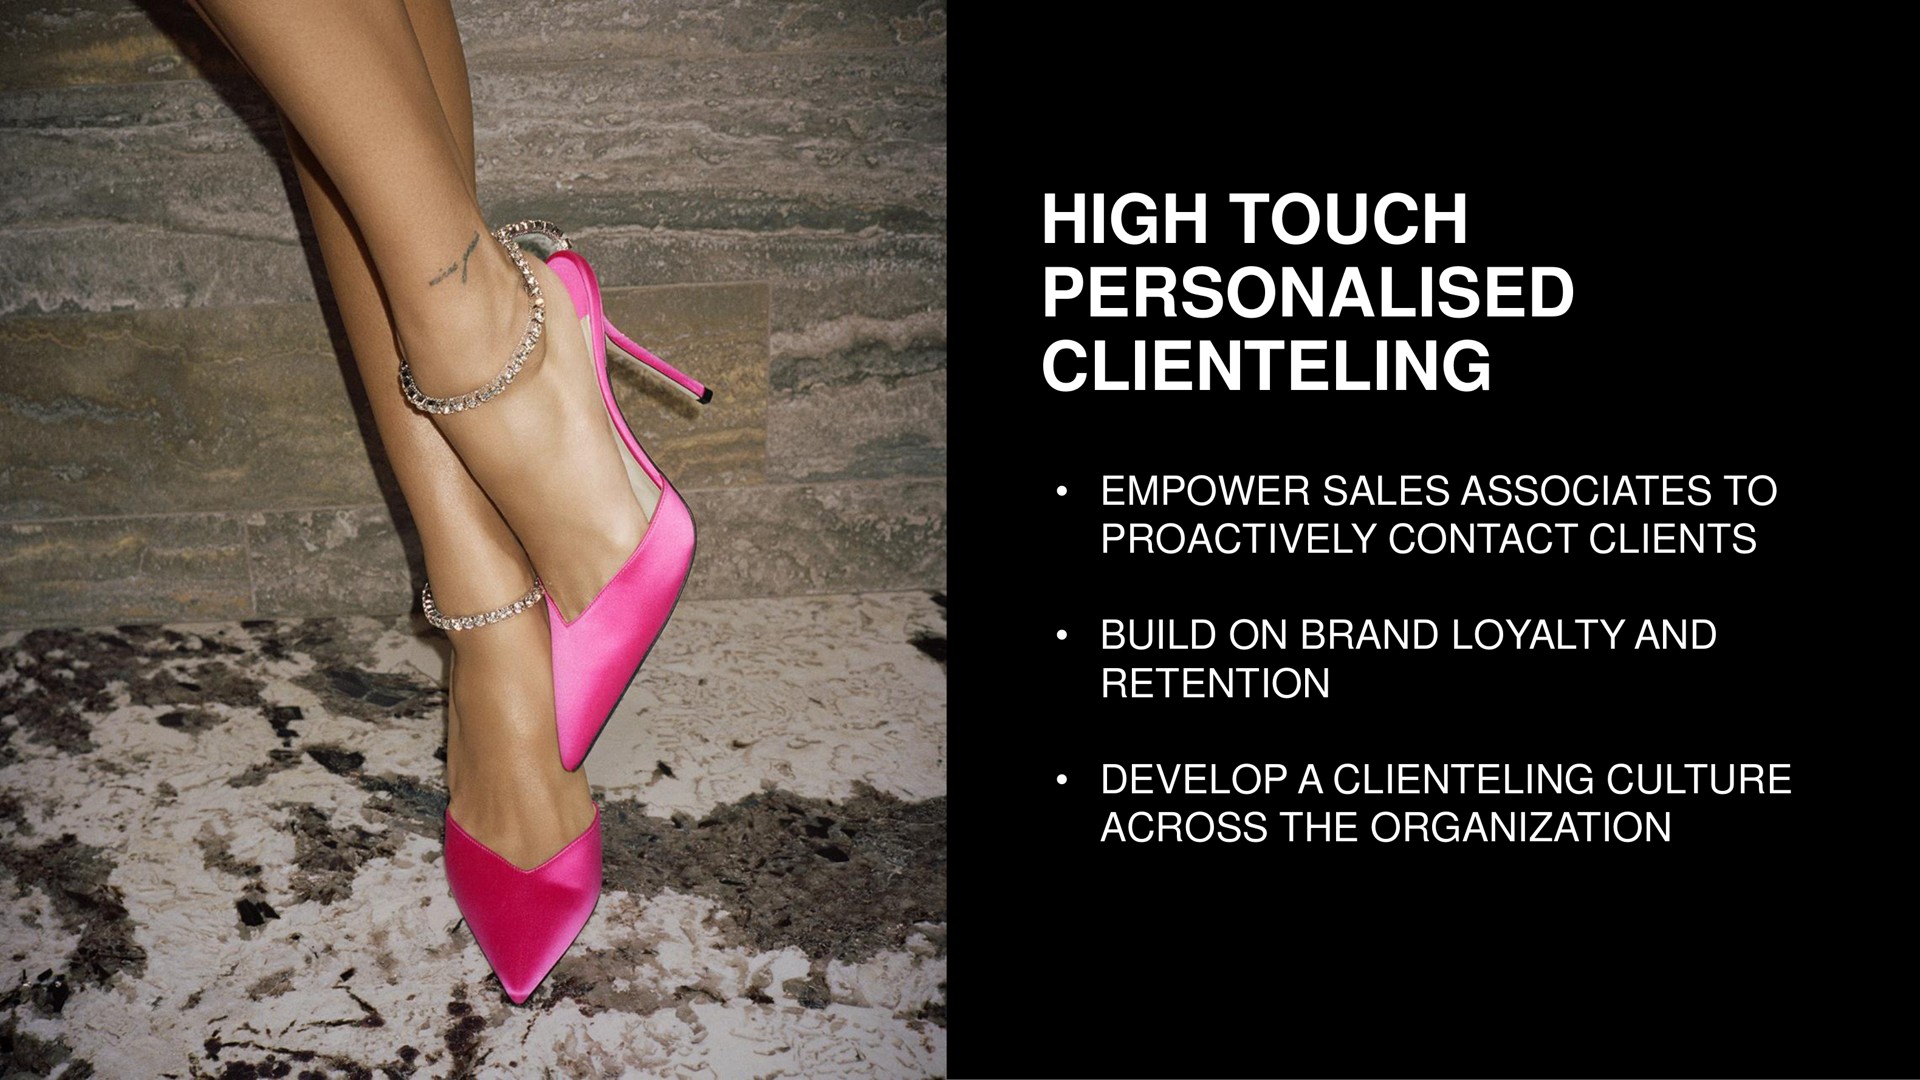 high touch empower sales associates to contact clients build on brand loyalty and retention develop a culture across the organization | Capri Holdings